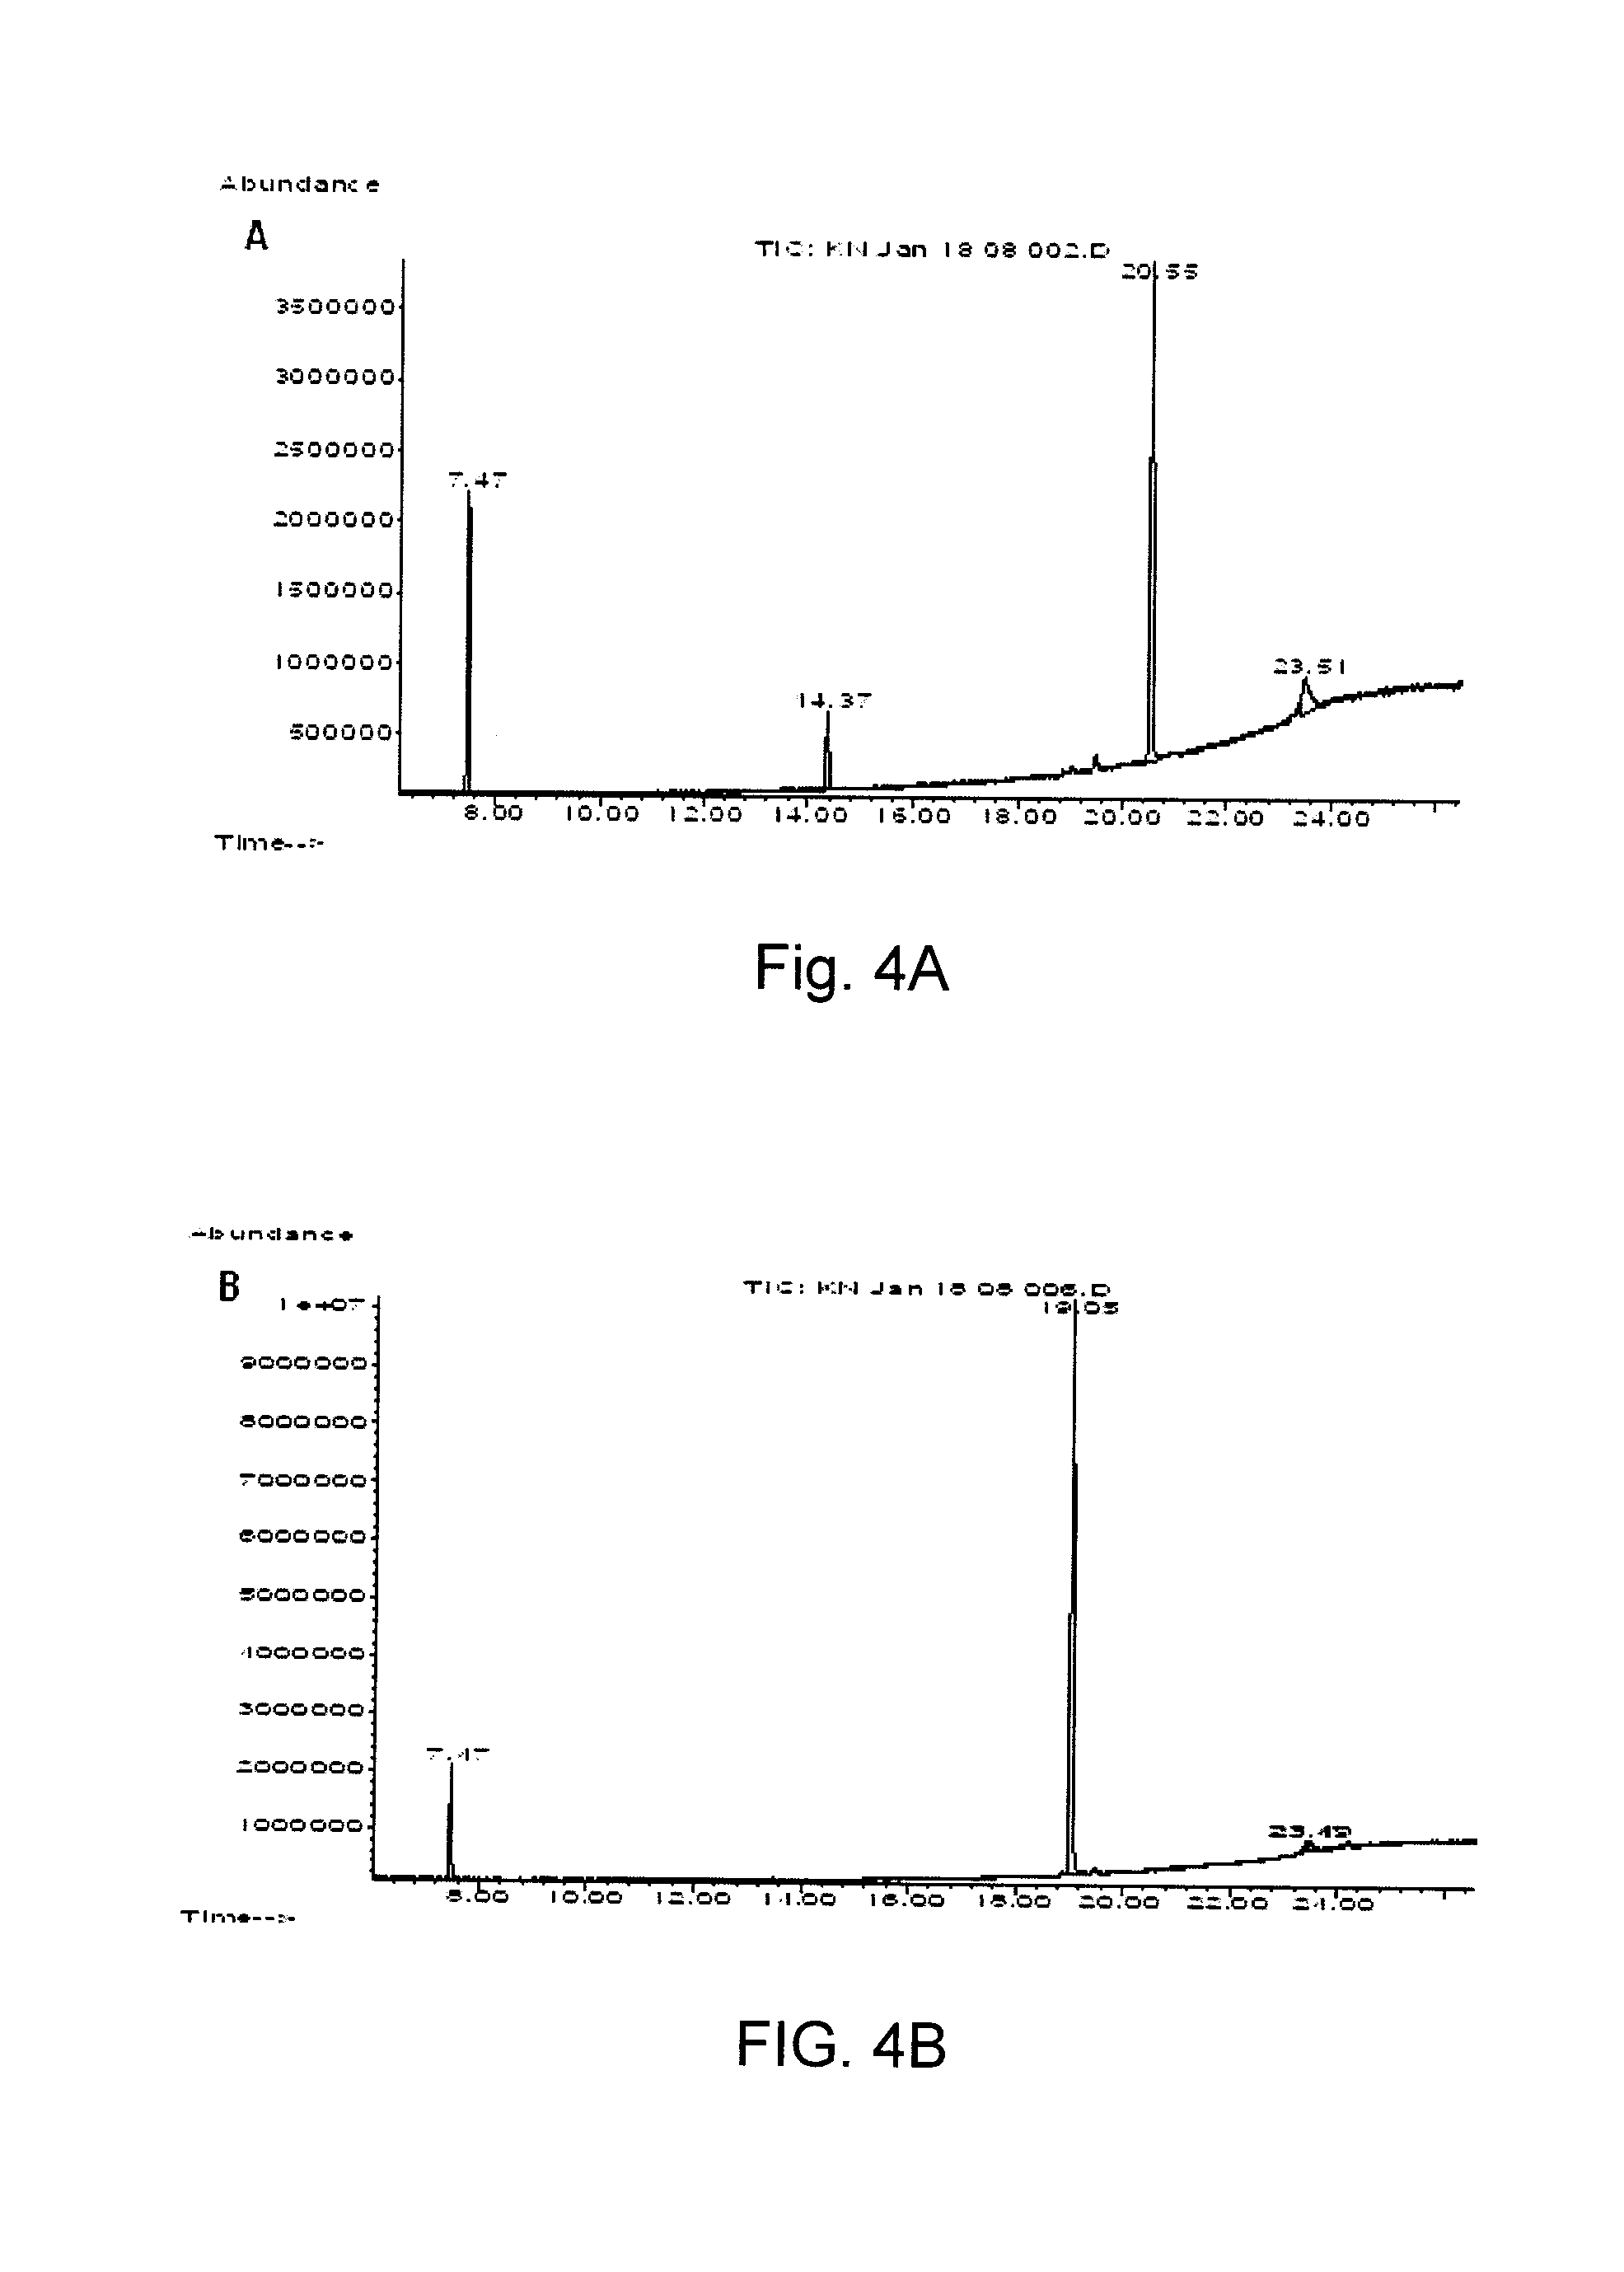 Nucleotide sequence encoding an alcohol dehydrogenase from artemisia annua and uses thereof